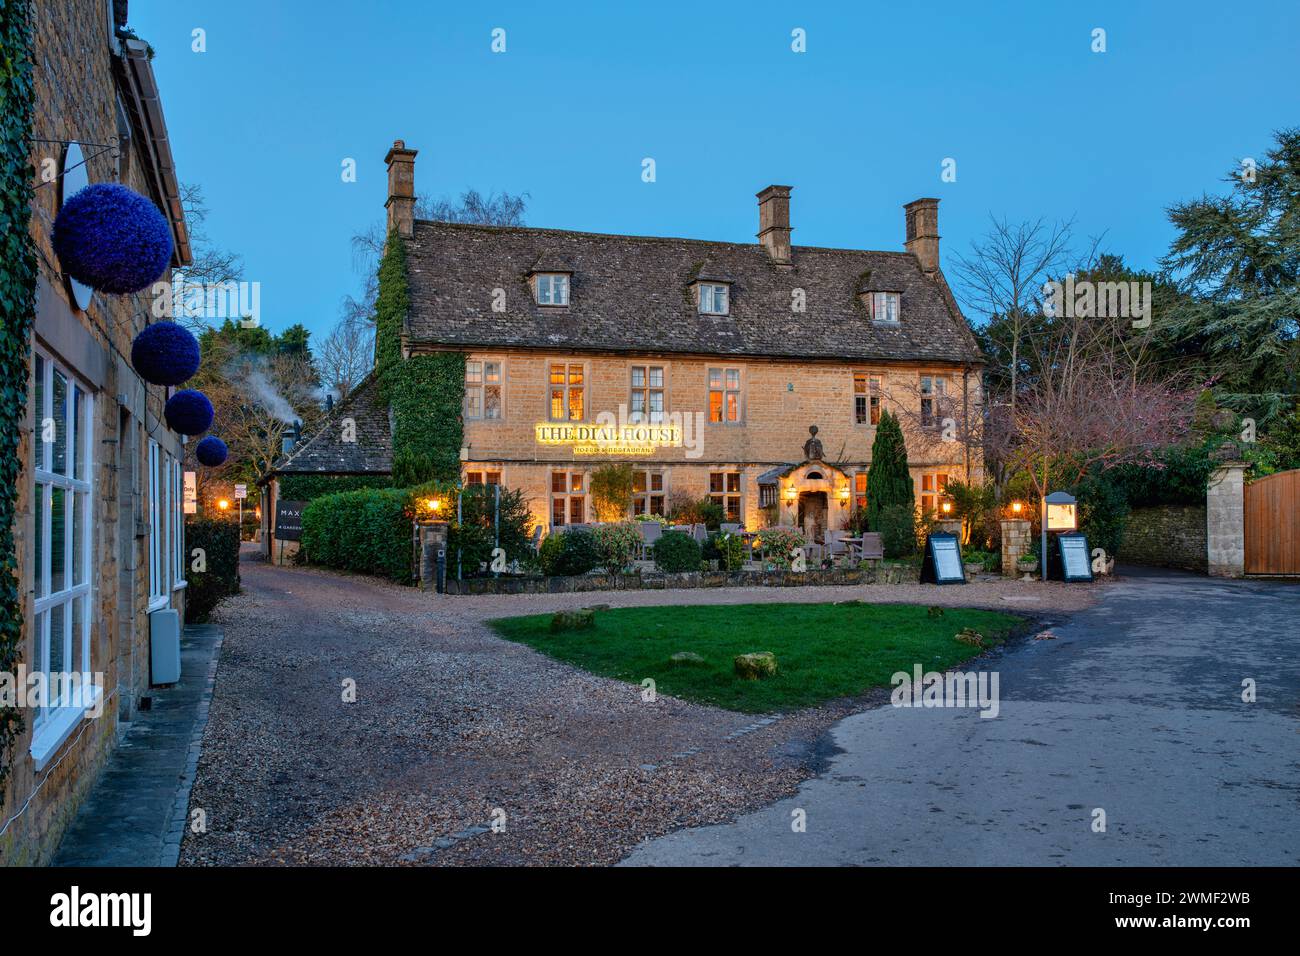 The Dial House Hotel at dusk. Bourton on the Water, Cotswolds, Gloucestershire, England Stock Photo